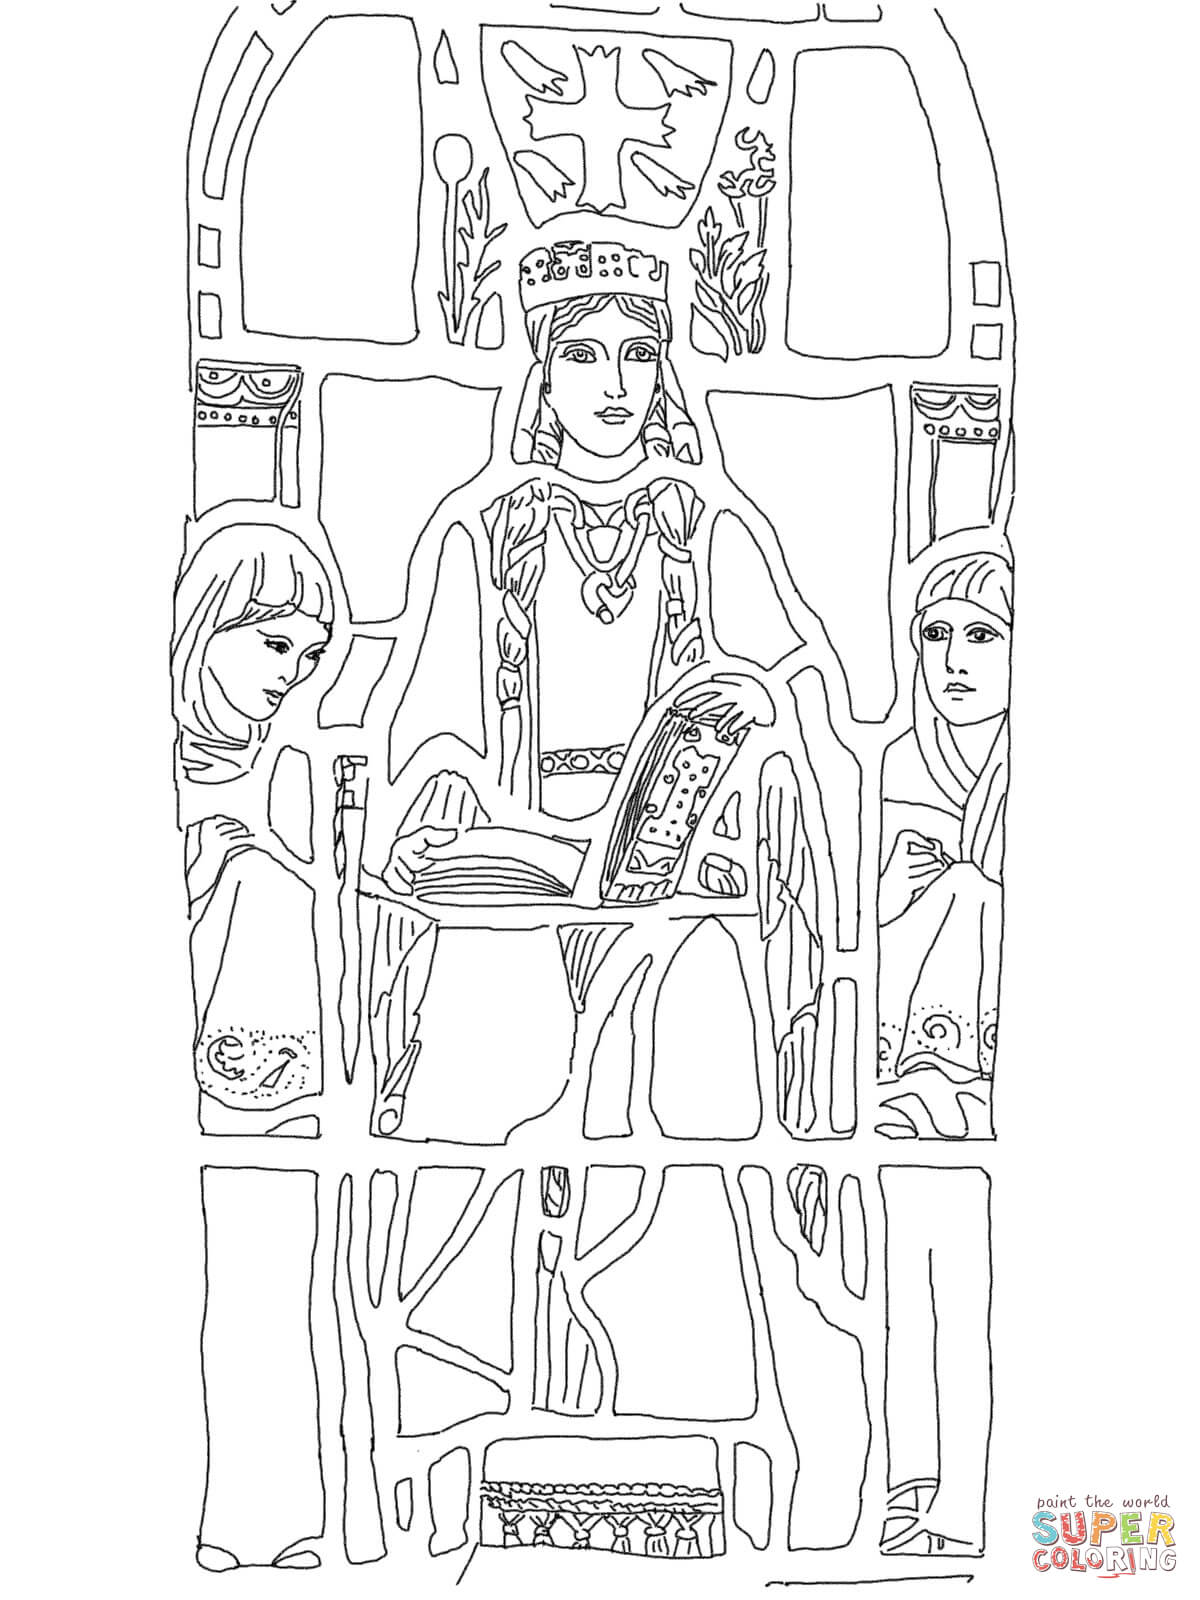 Saint margaret of scotland coloring page free printable coloring pages